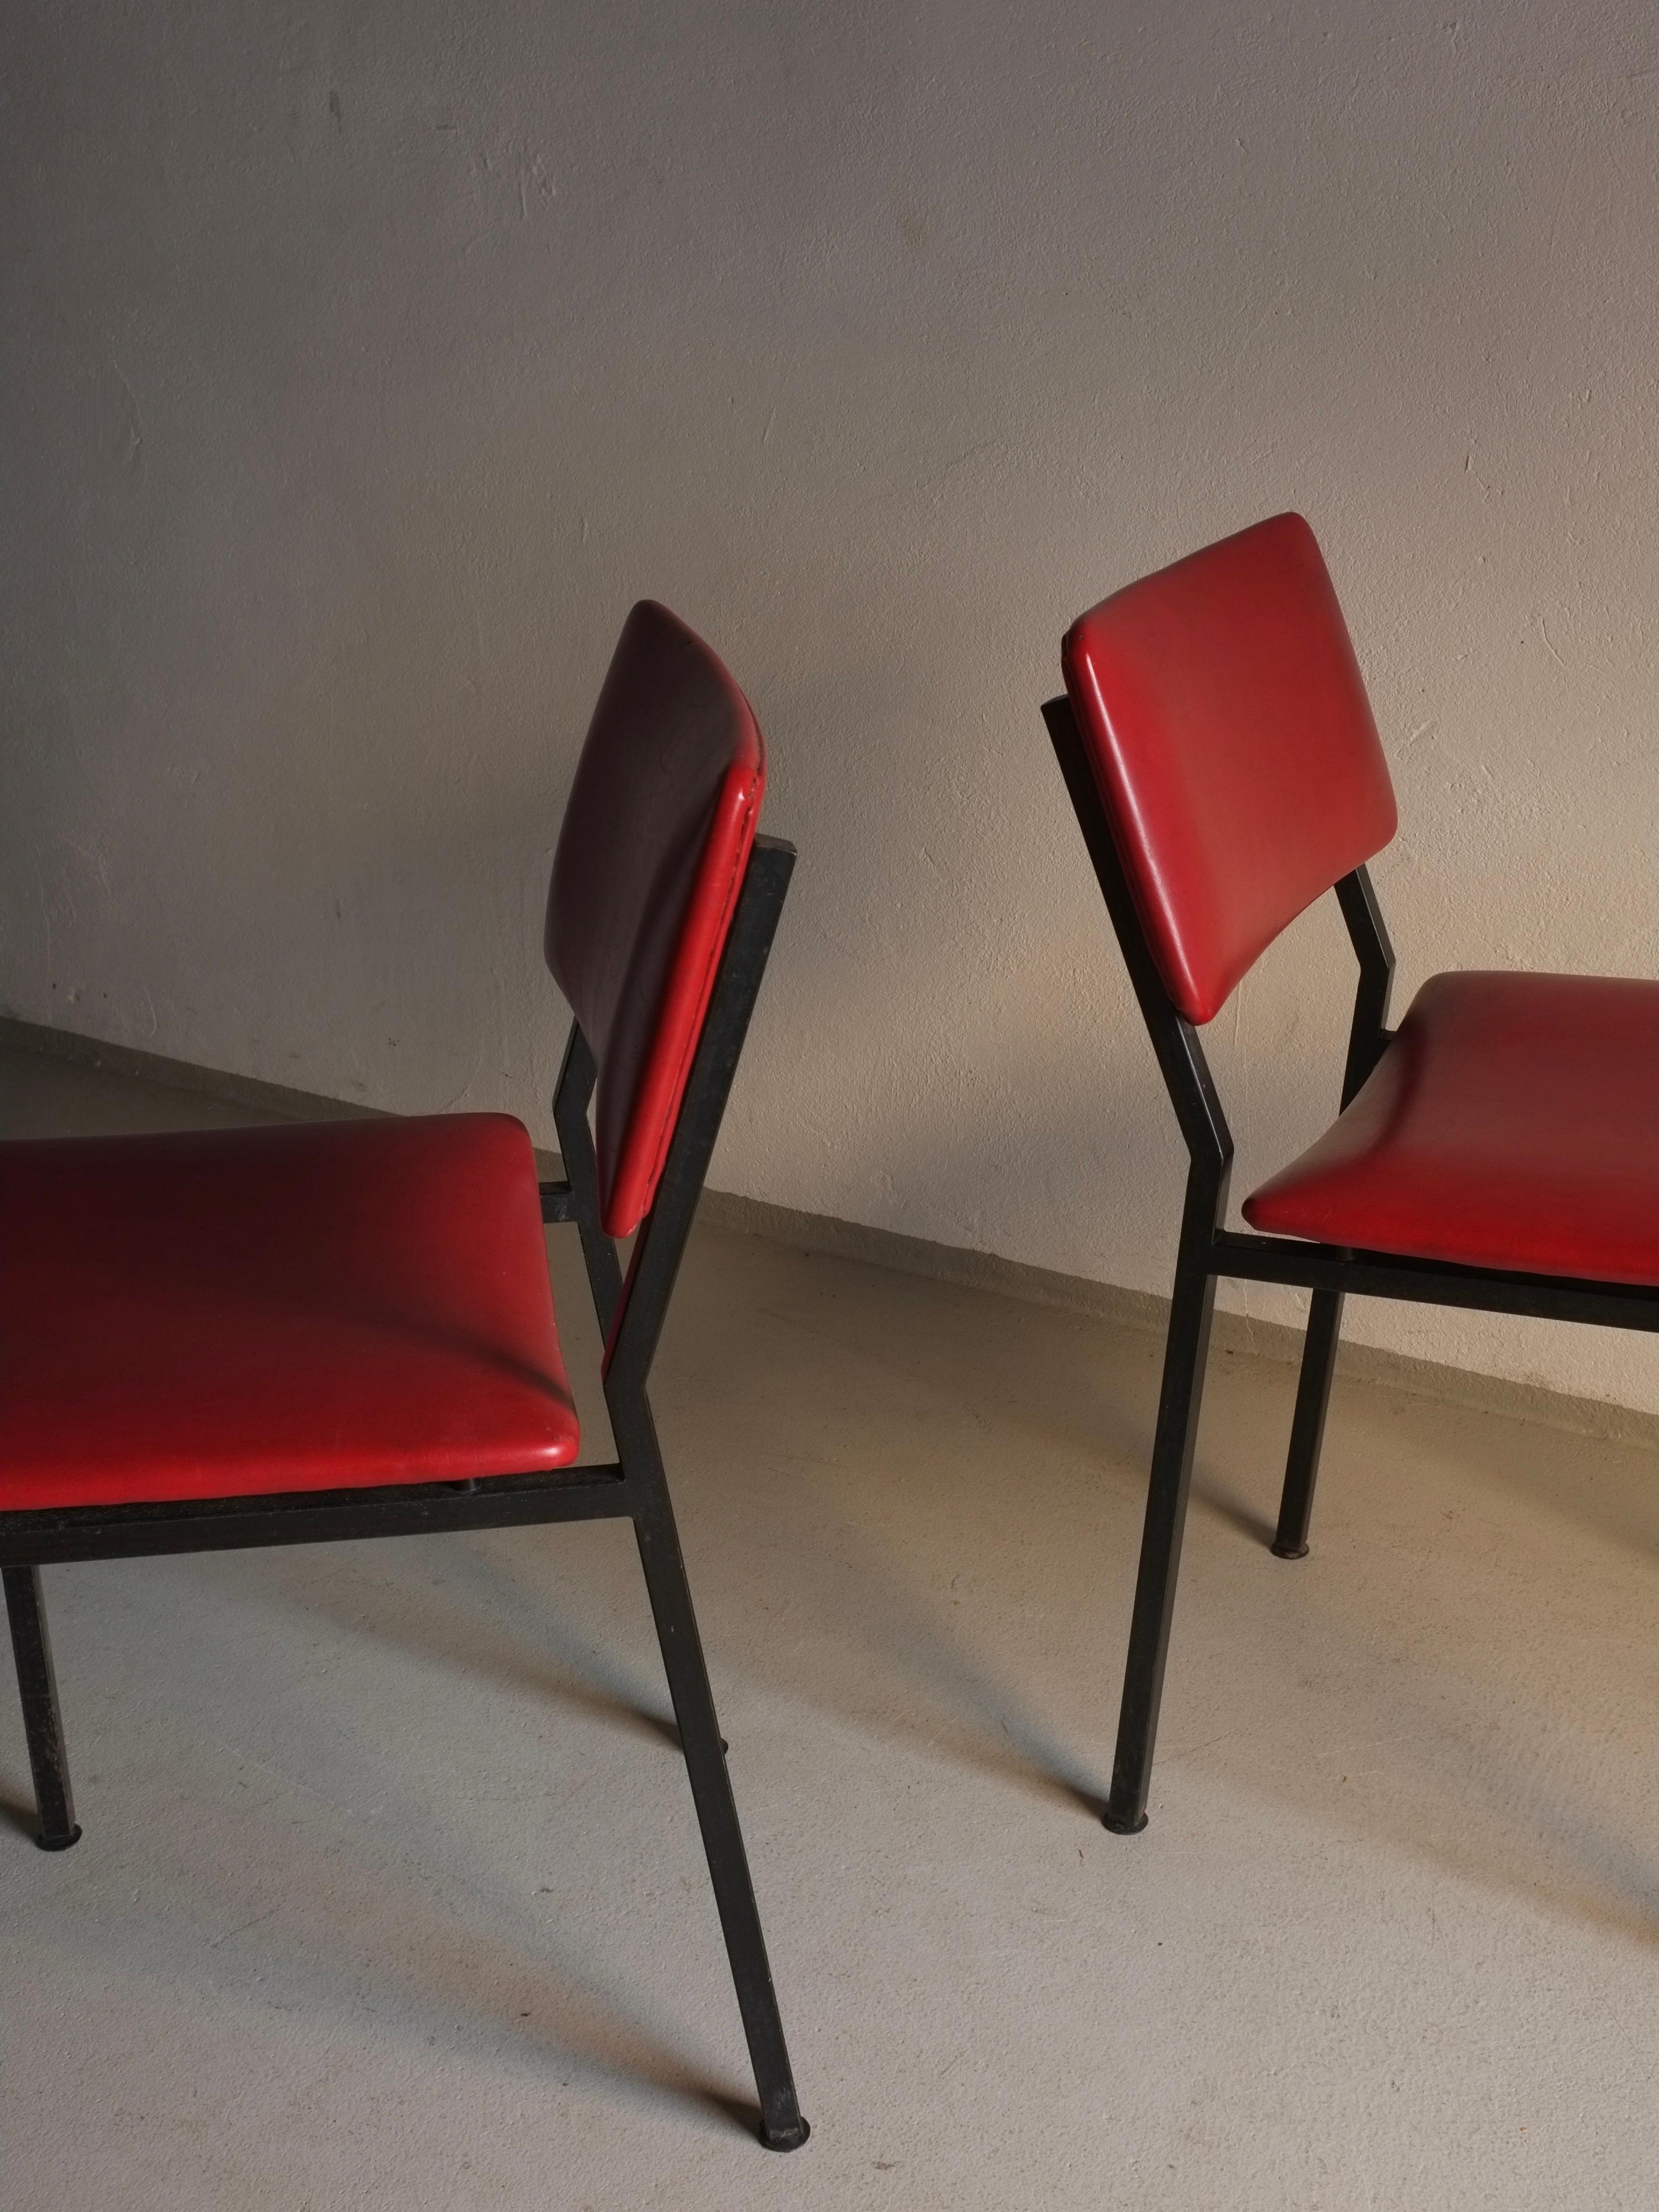 Set of 2 Black Metal Chairs by Gerrit Veenendaal For Kembo, Netherlands 1960s For Sale 2